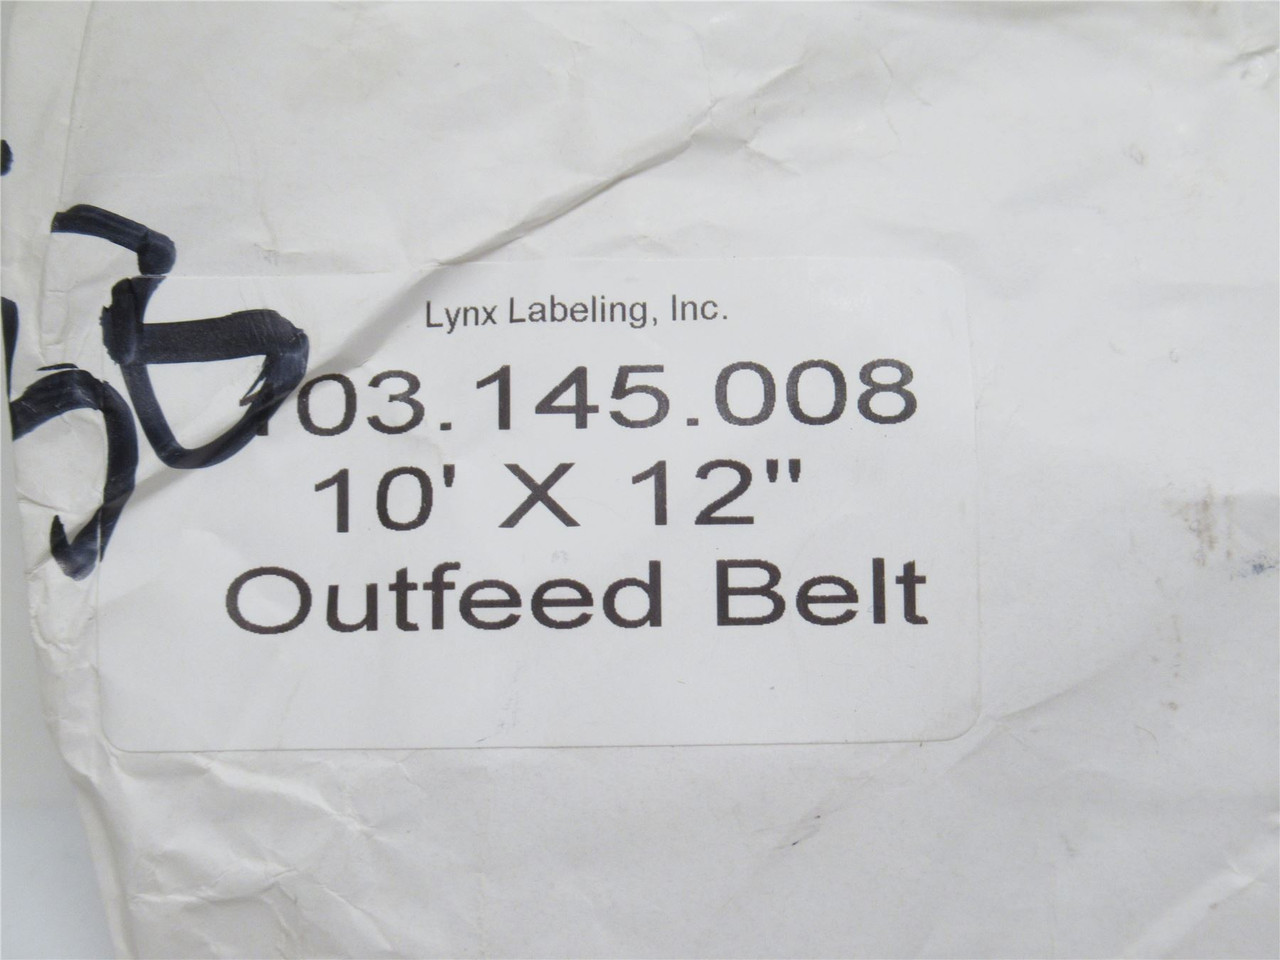 Lynx Labeling 103.145.008; Outfeed Belt; 12" Wide x 10' Long